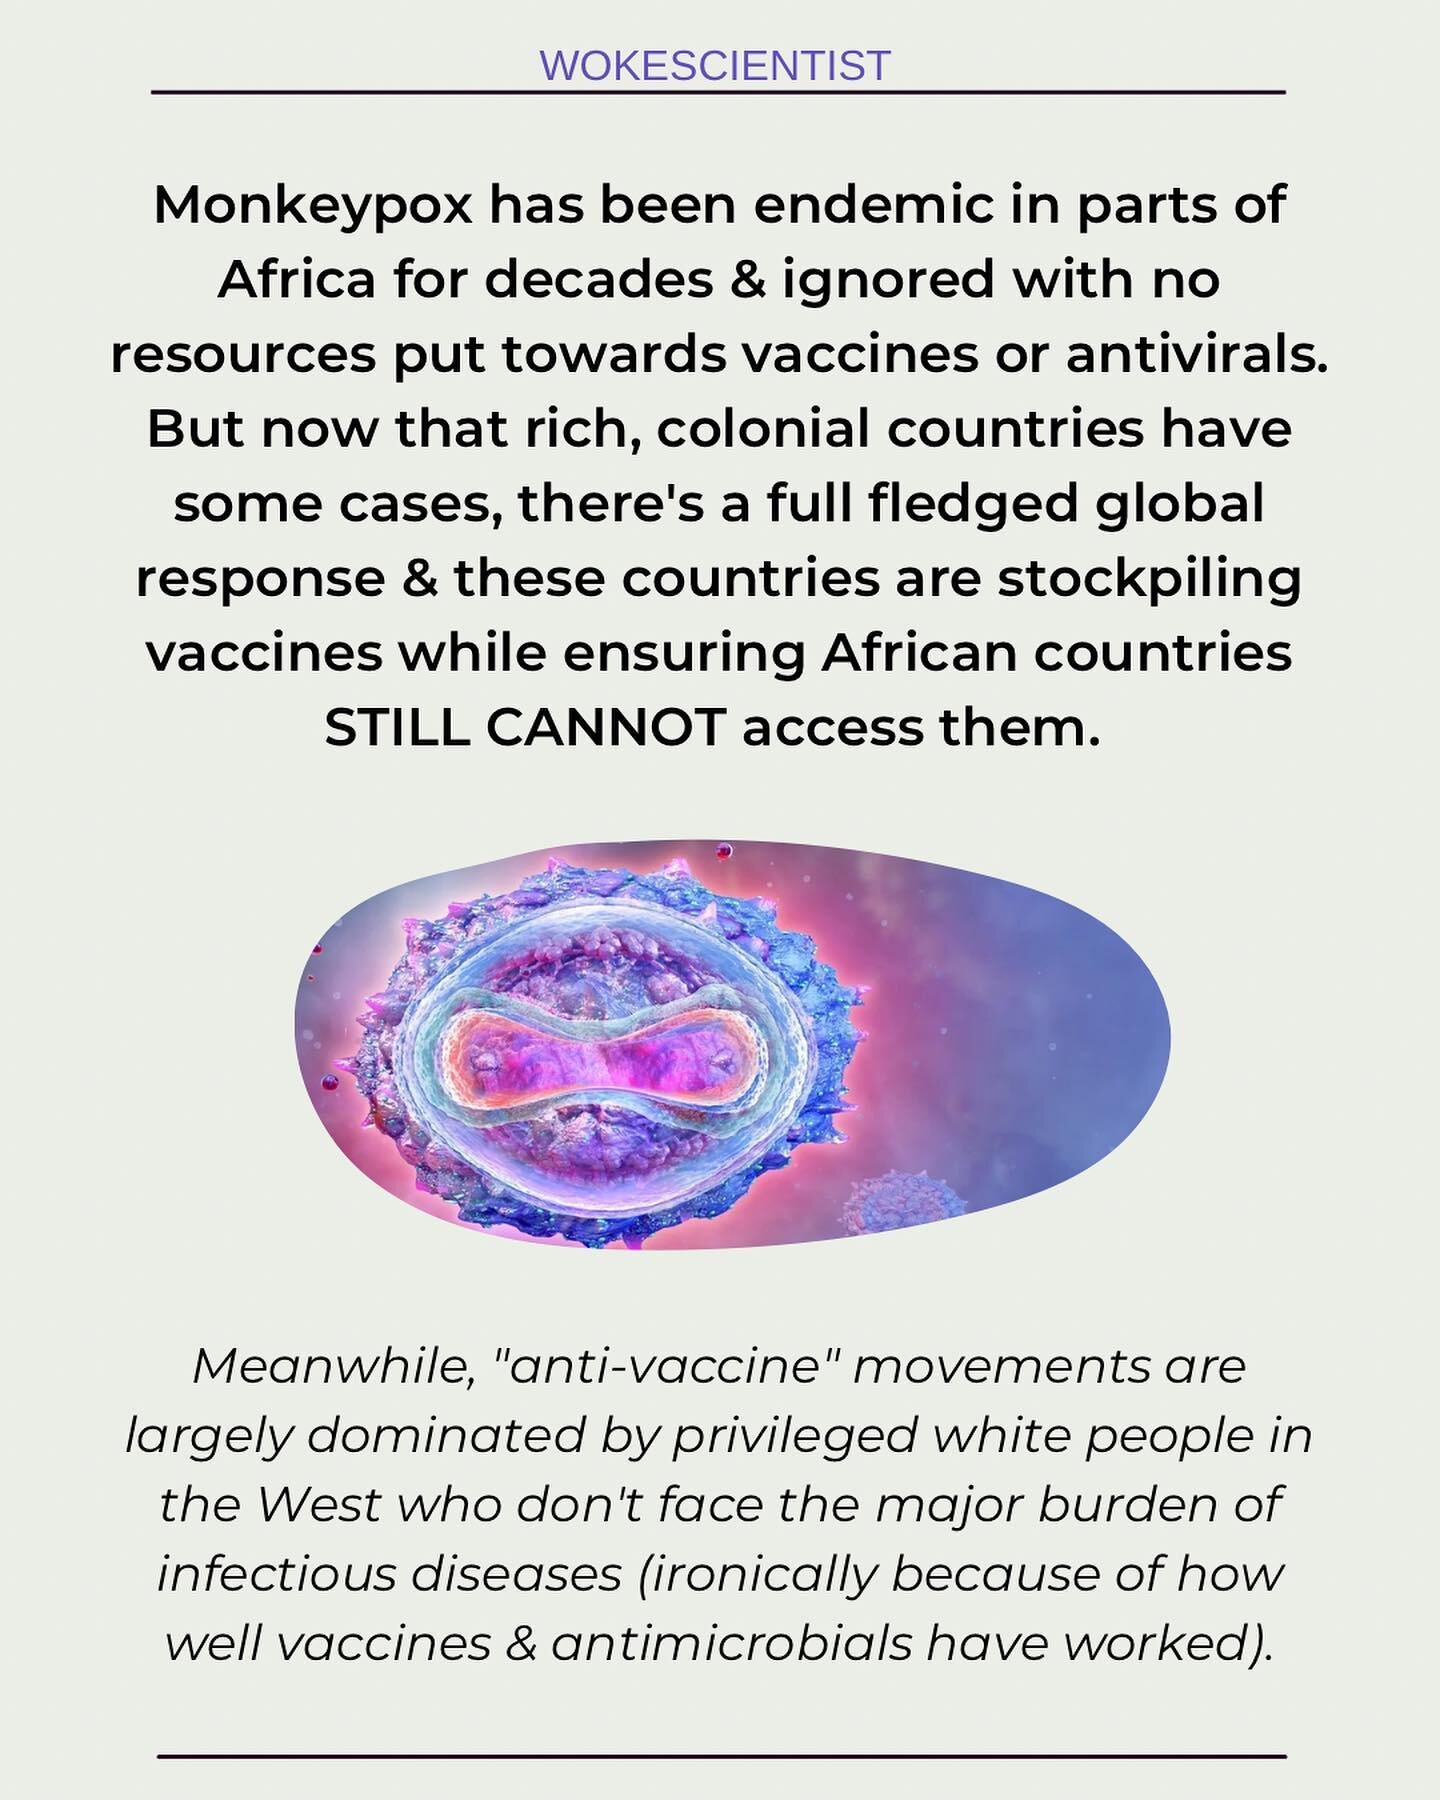 There&rsquo;s been a lot of convos about inequity &amp; social injustice regarding monkey pox- a massive aspect ignored with any &ldquo;global health crisis&rdquo; is that it only becomes a global concern when rich, colonial countries are impacted in